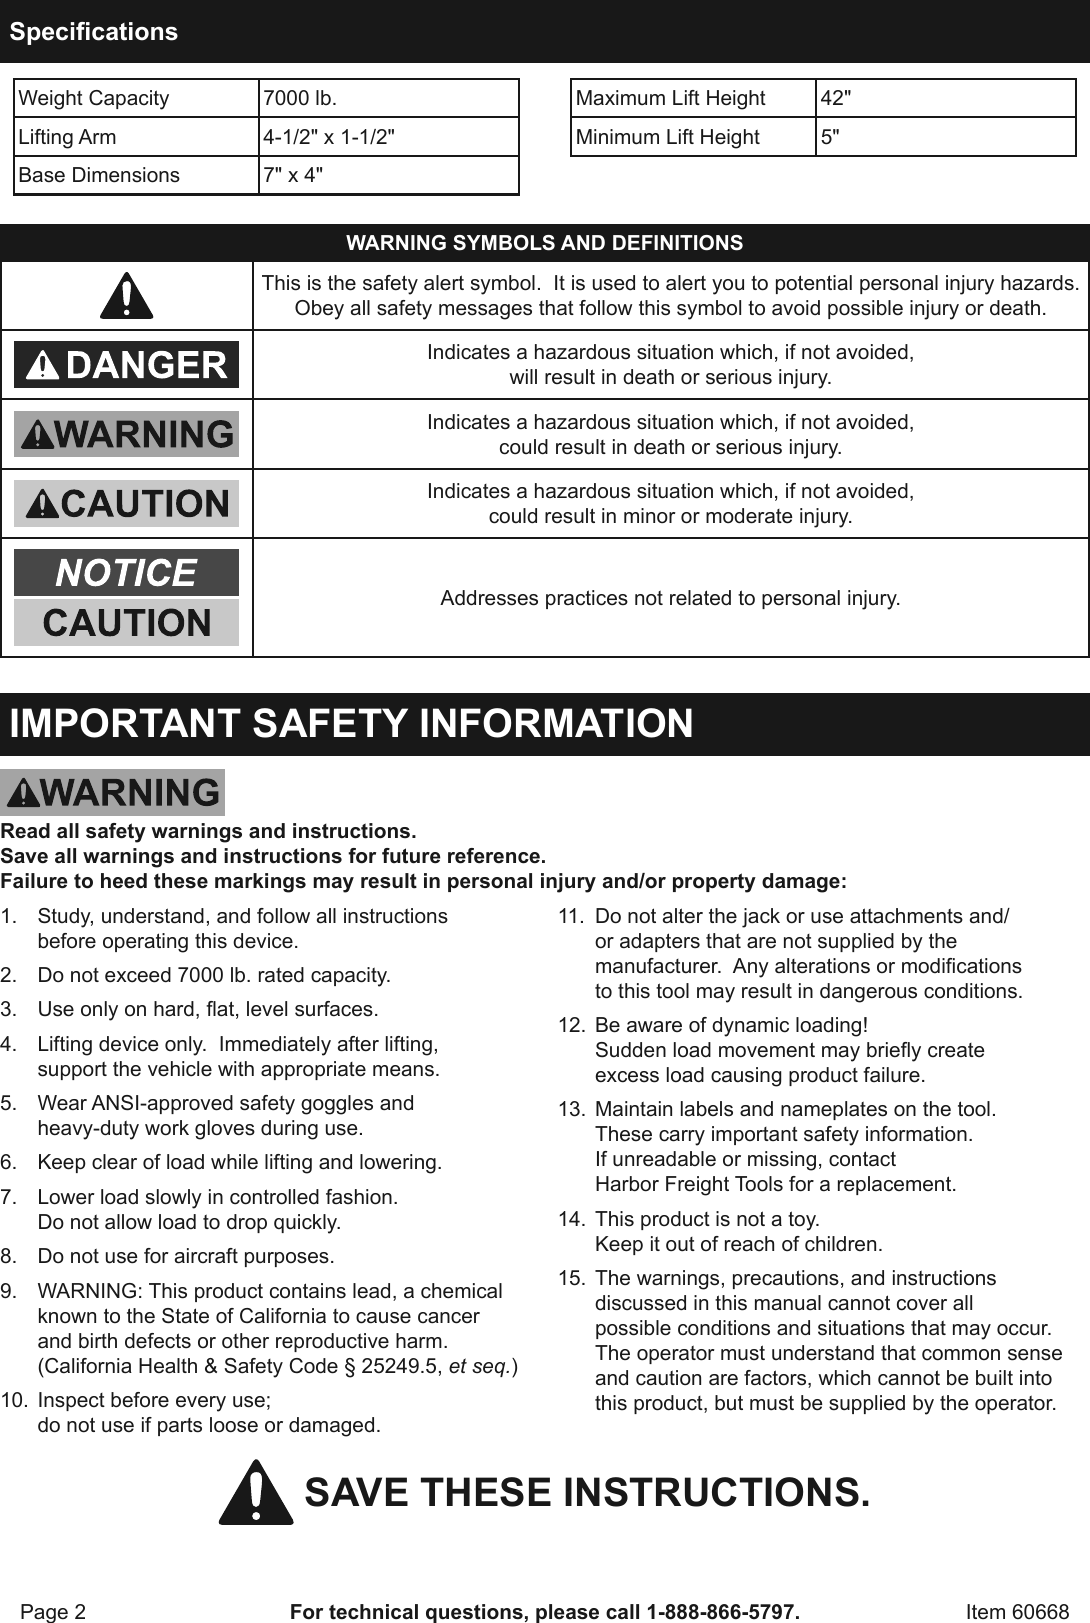 Page 2 of 8 - Manual For The 60668 42 In. High Lift Farm Jack